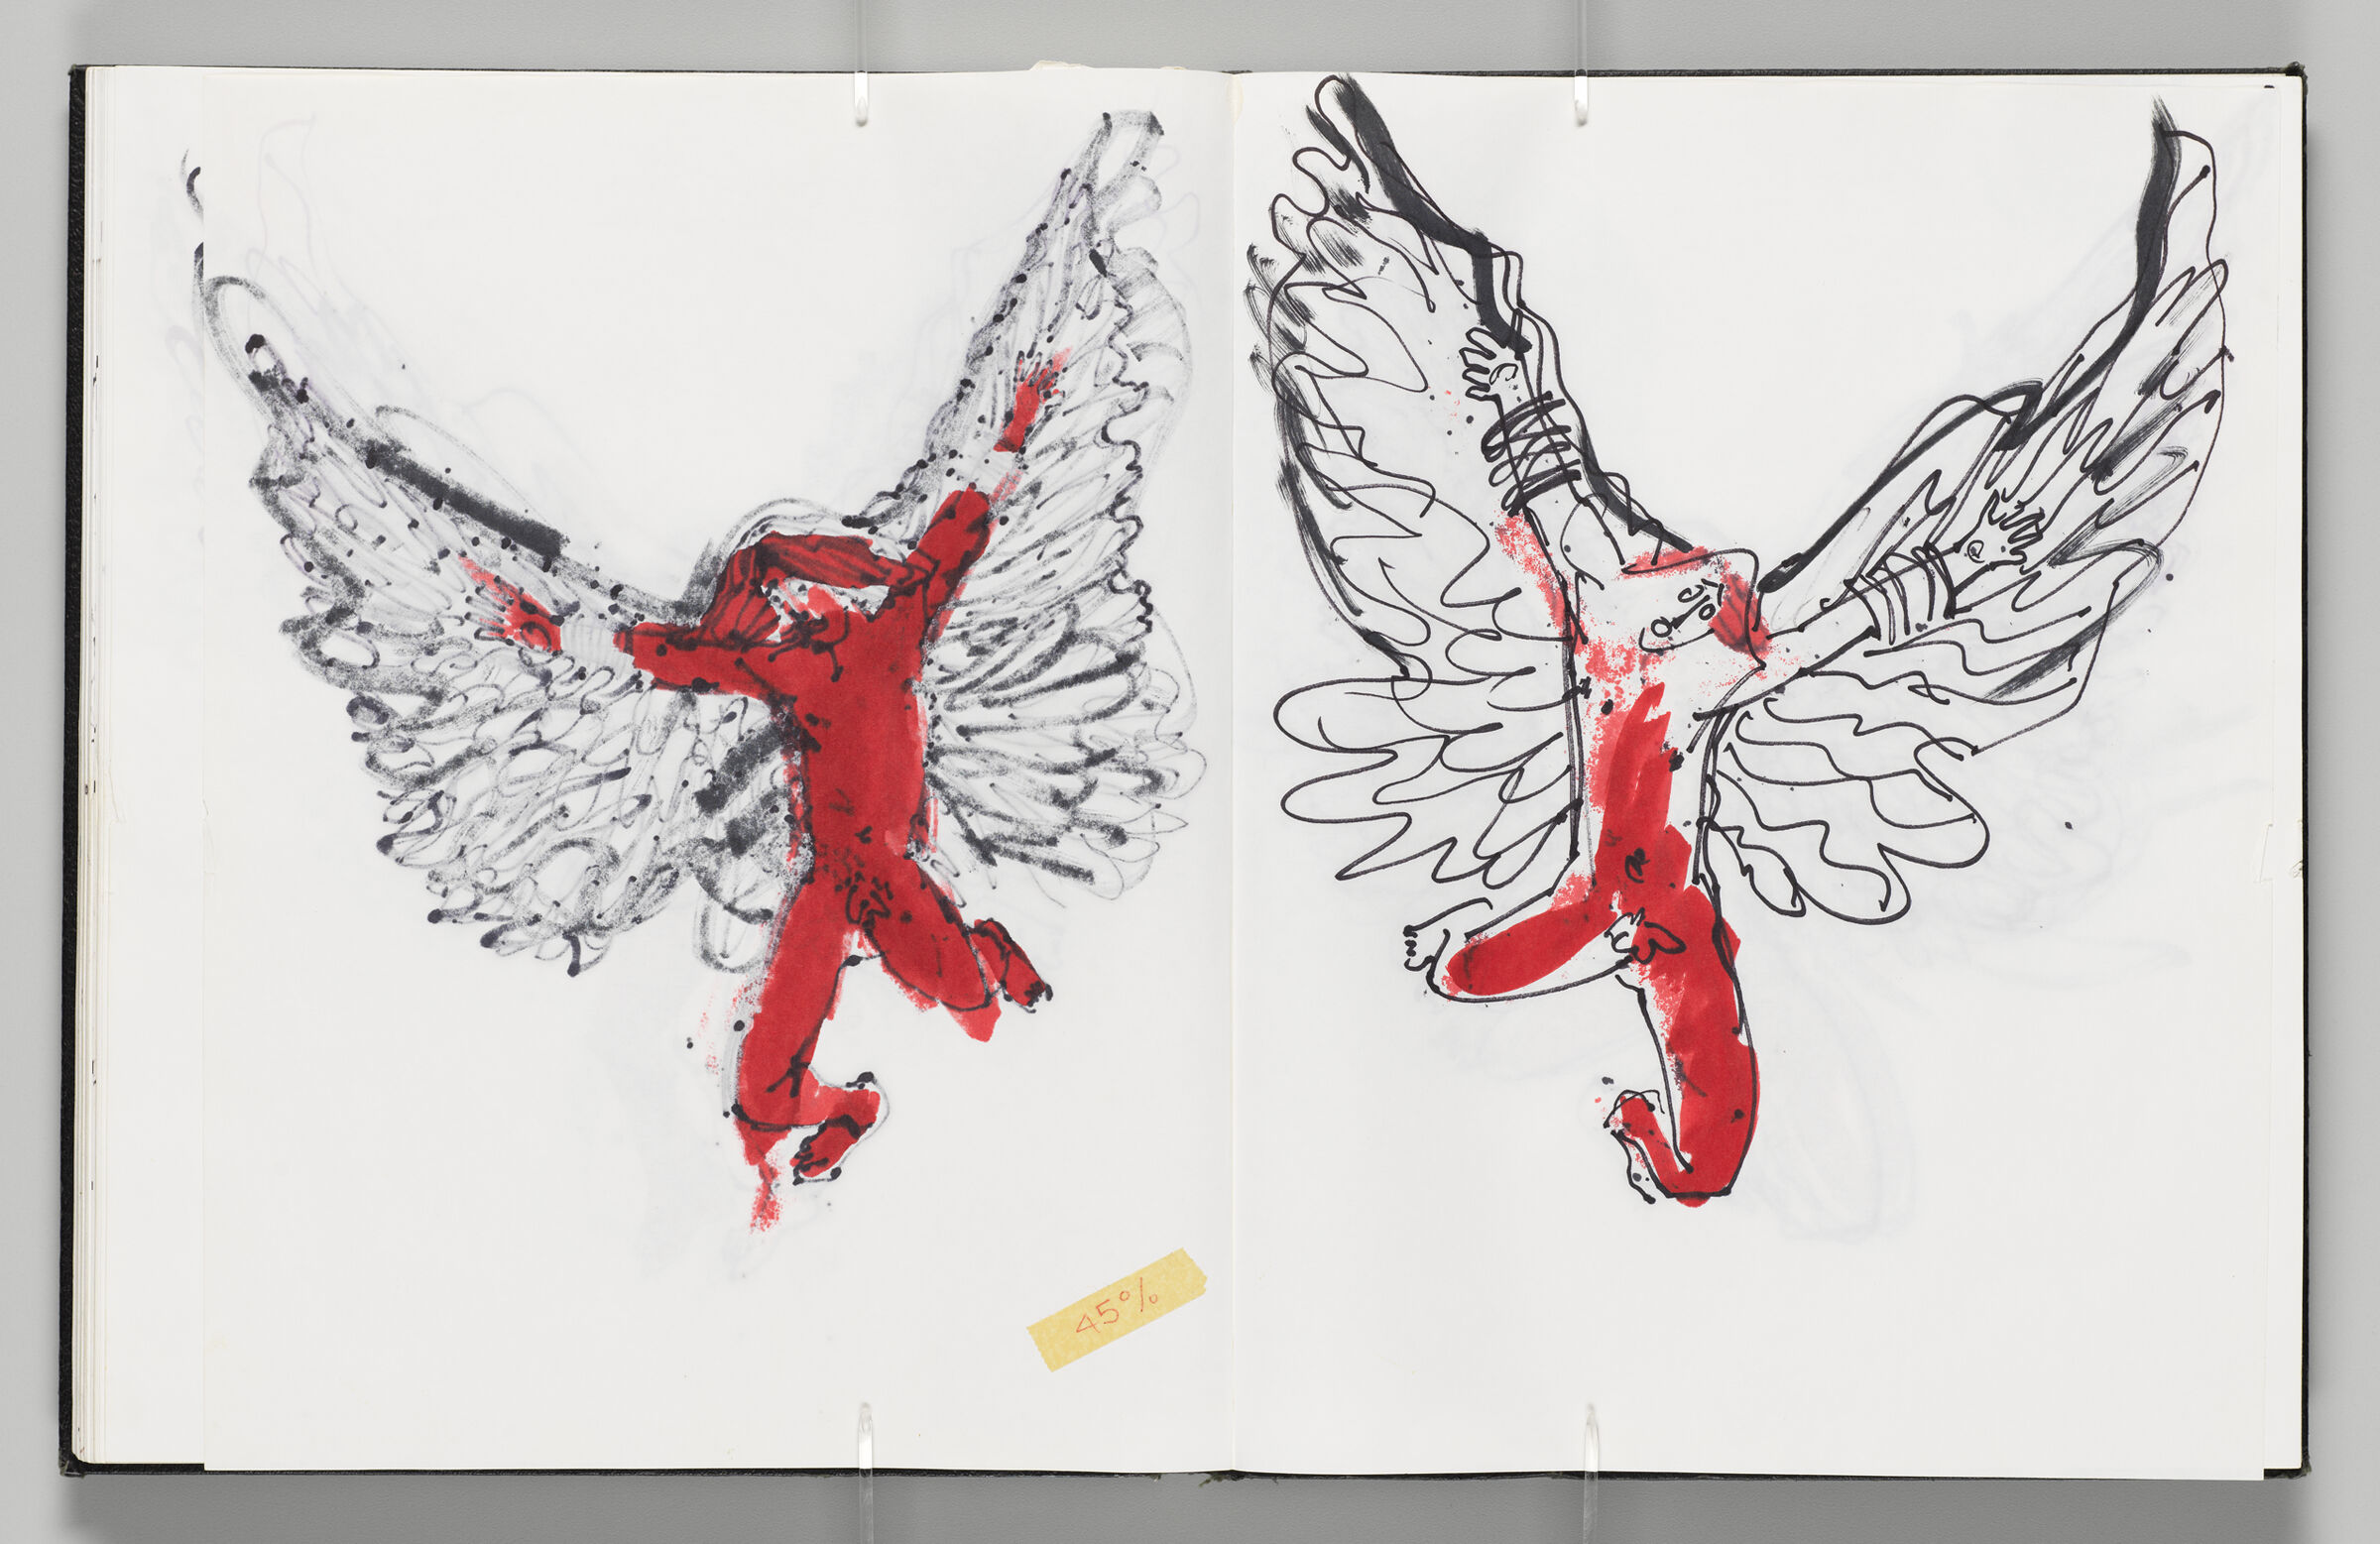 Untitled (Bleed-Through Of Previous Page With Tape, Left Page); Untitled (Sketch Of Icarus With Color Transfer, Right Page)